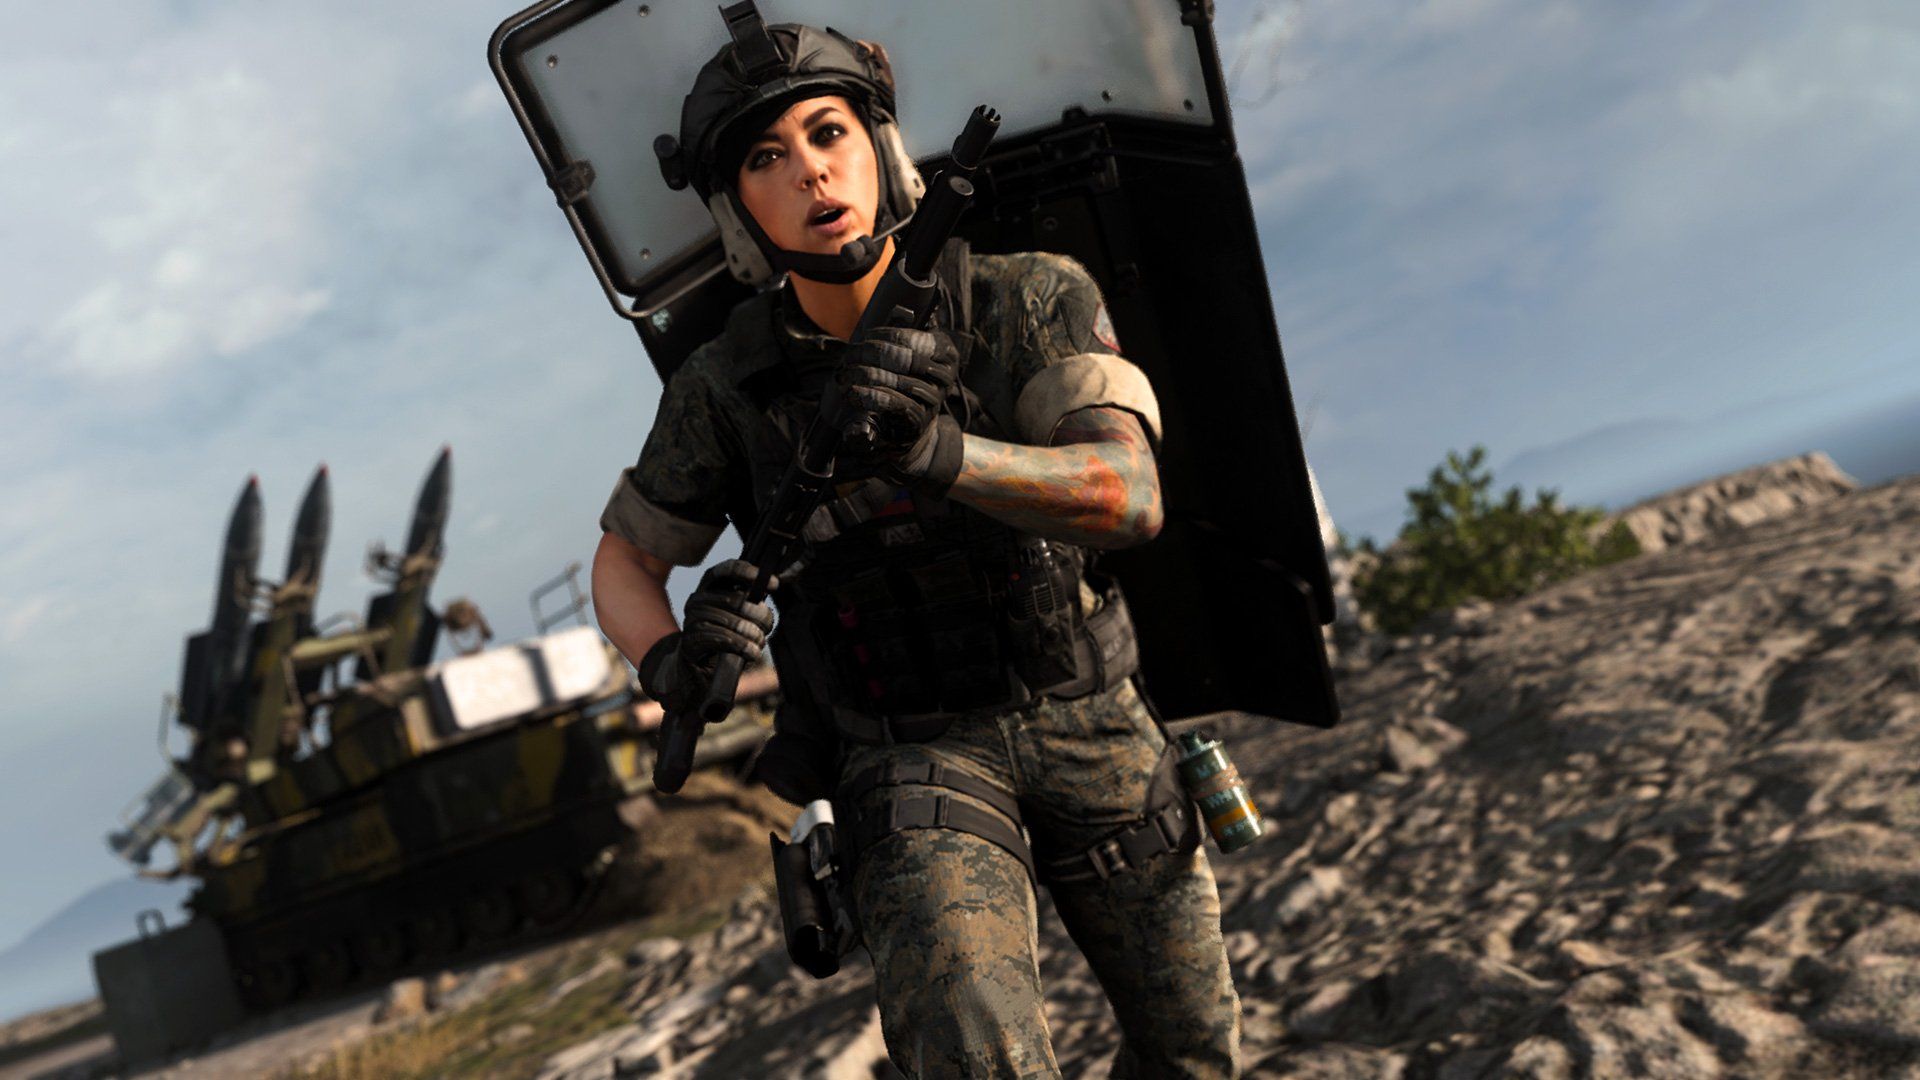 Activision is being sued for a Call of Duty: Modern Warfare and Warzone character's appearance